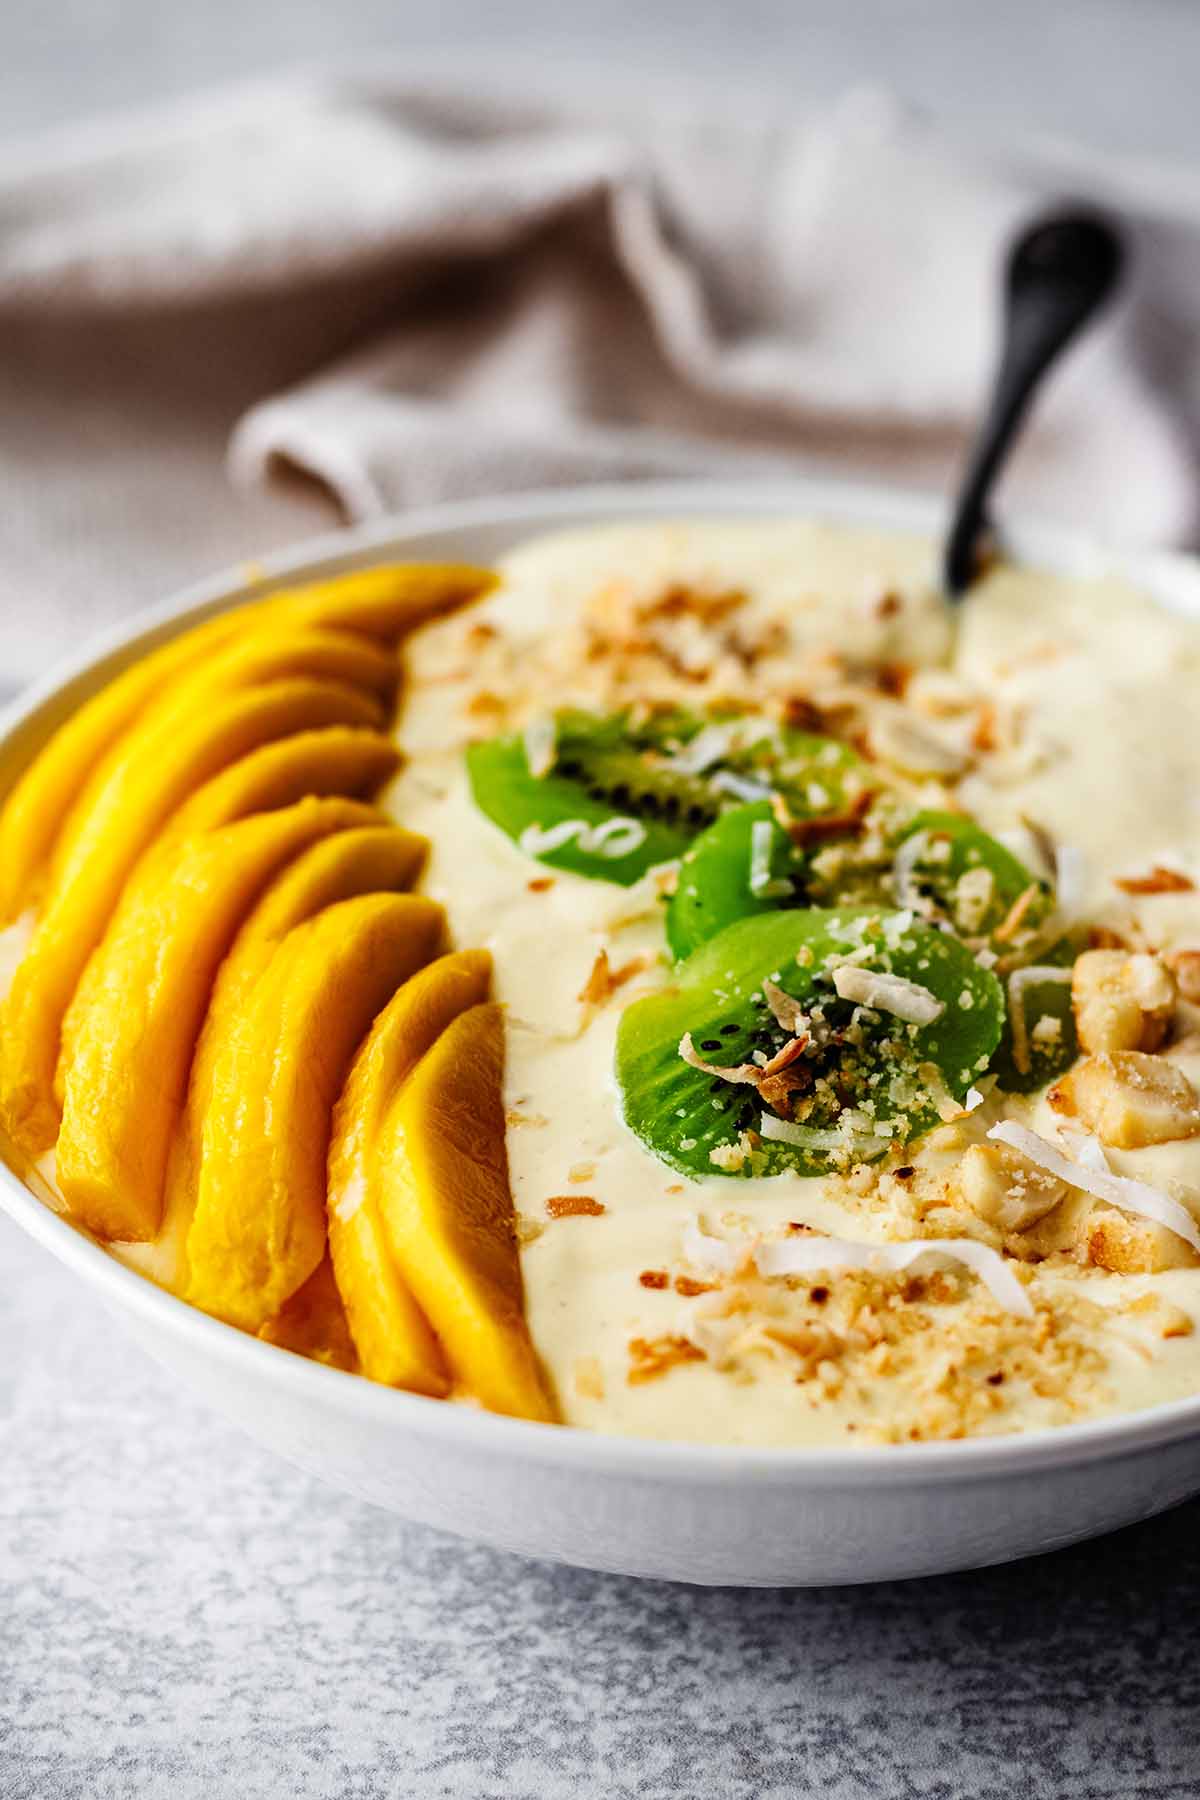 Front view of thick mango smoothie in a white bowl topped with fresh mango slices, chopped macadamia nuts, sliced kiwi, and toasted coconut flakes with a spoon and a light beige napkin.